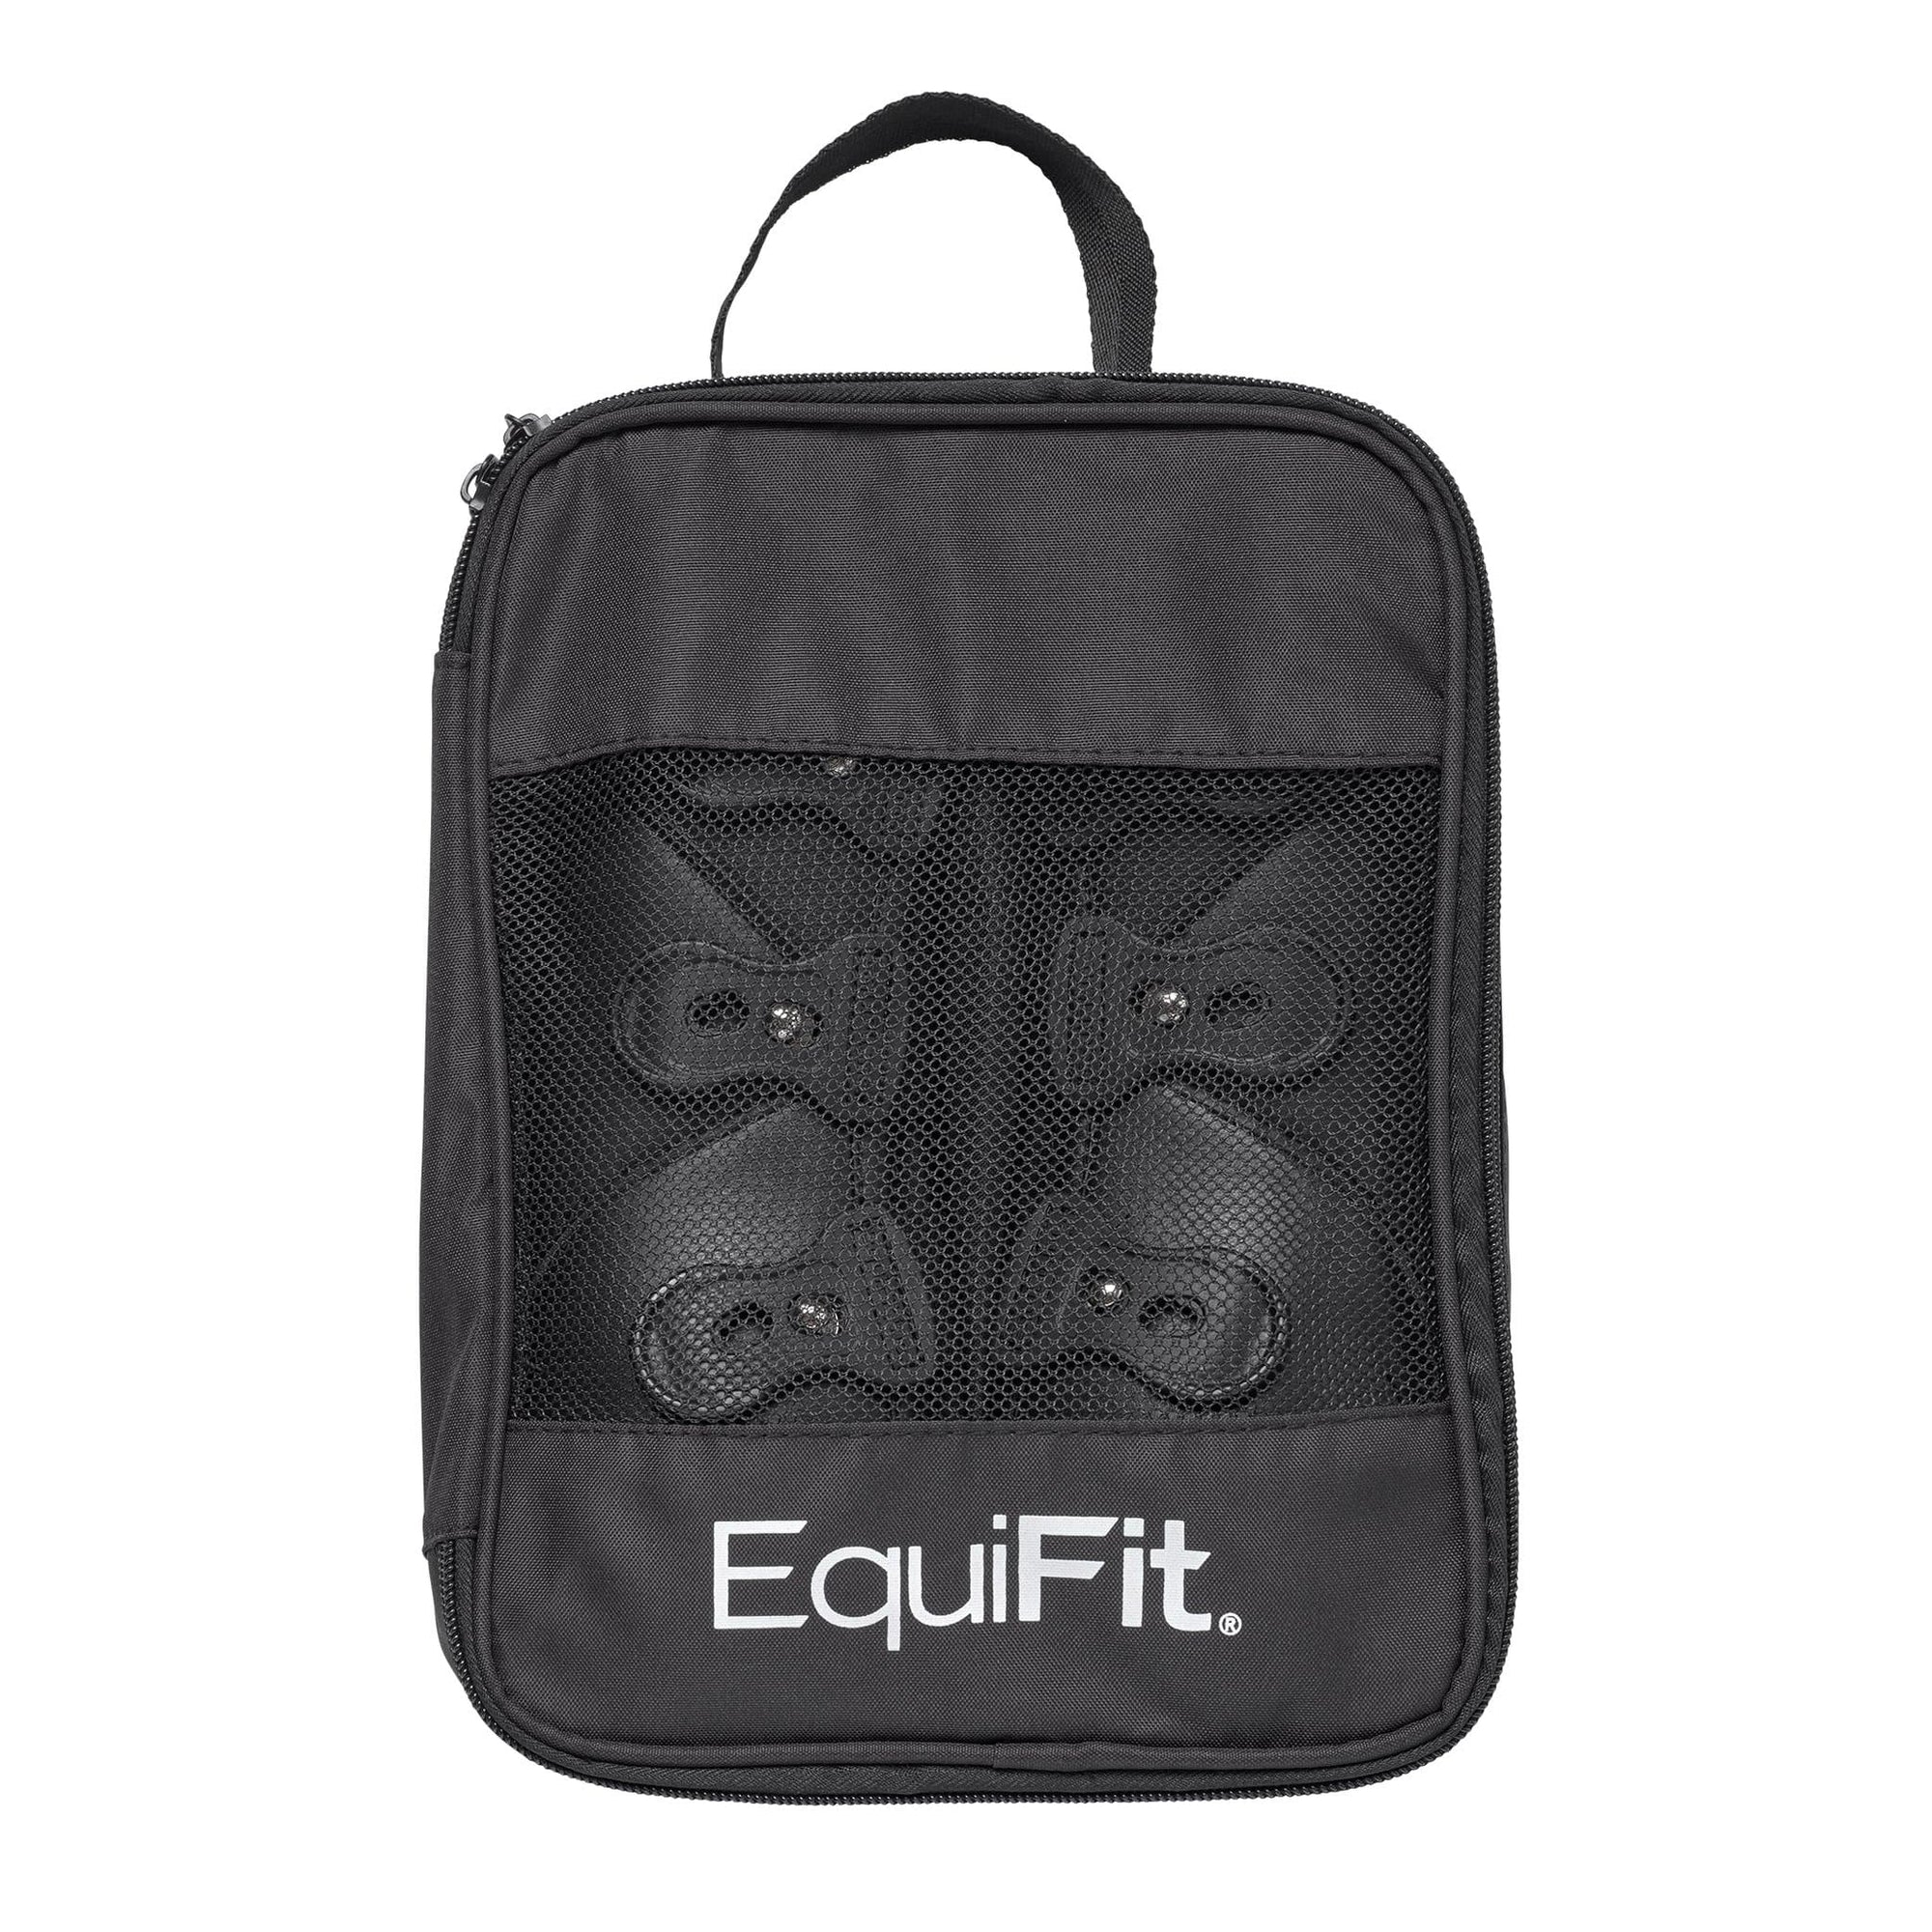 The Boot Bag is a reusable bag to help prolong the life of your EquiFit boots.